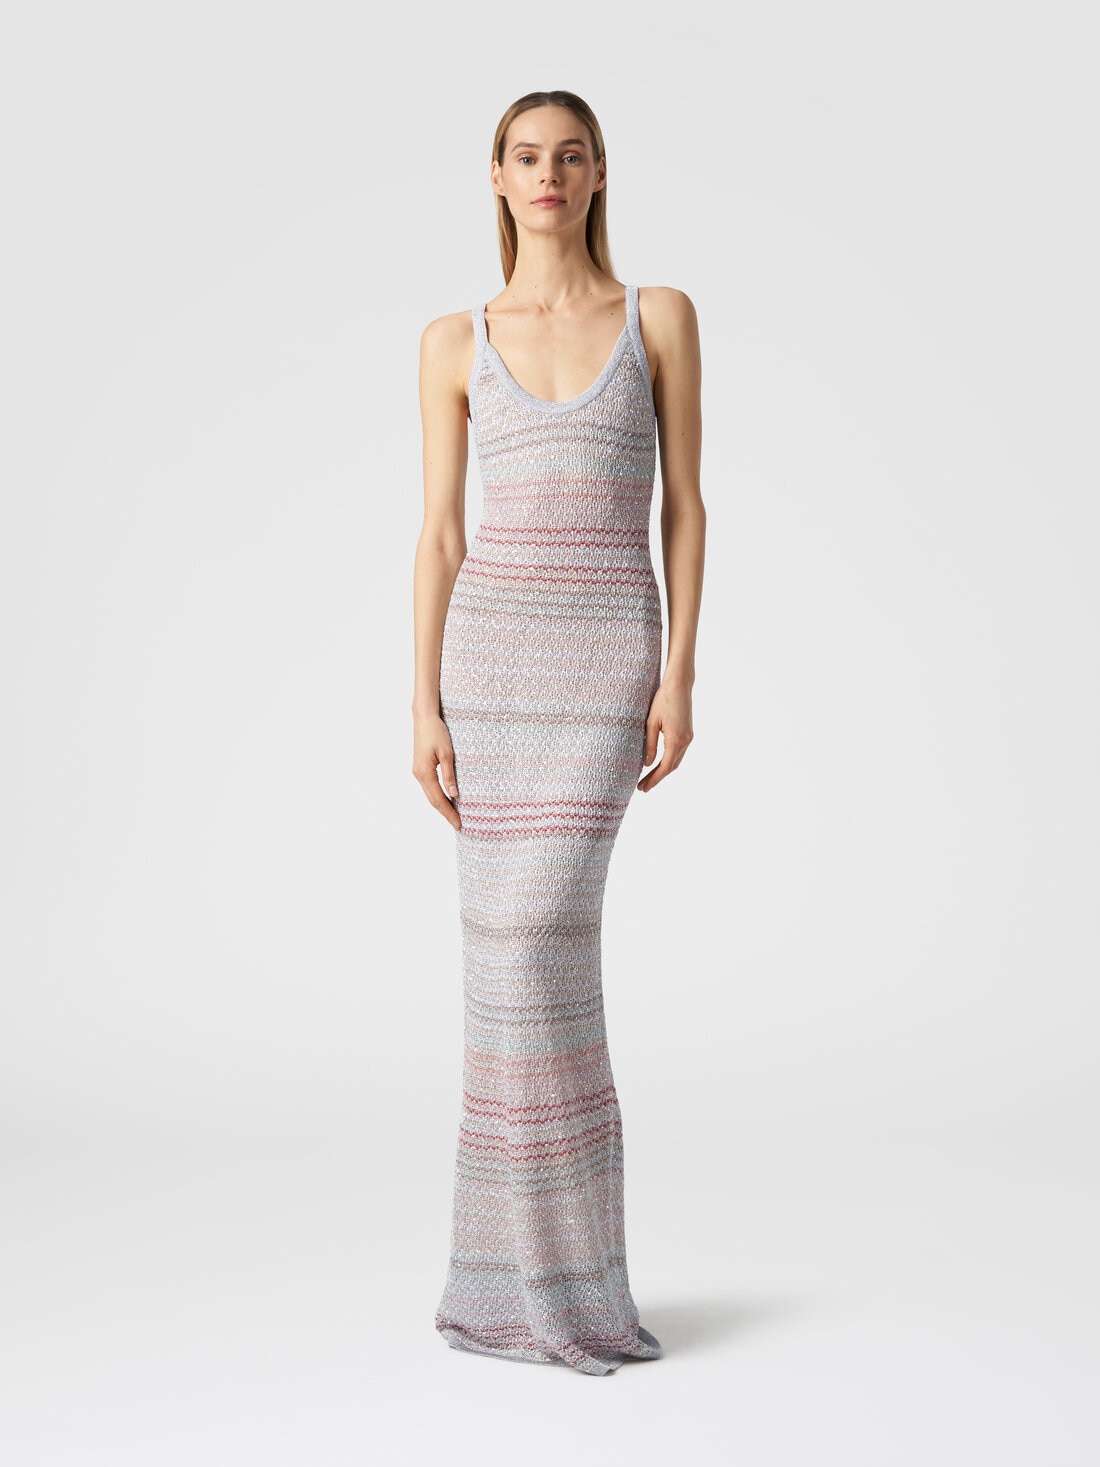 Long dress in zigzag knit with crochet-effect weave, Multicoloured  - DS24SG14BK033PSM9AI - 1